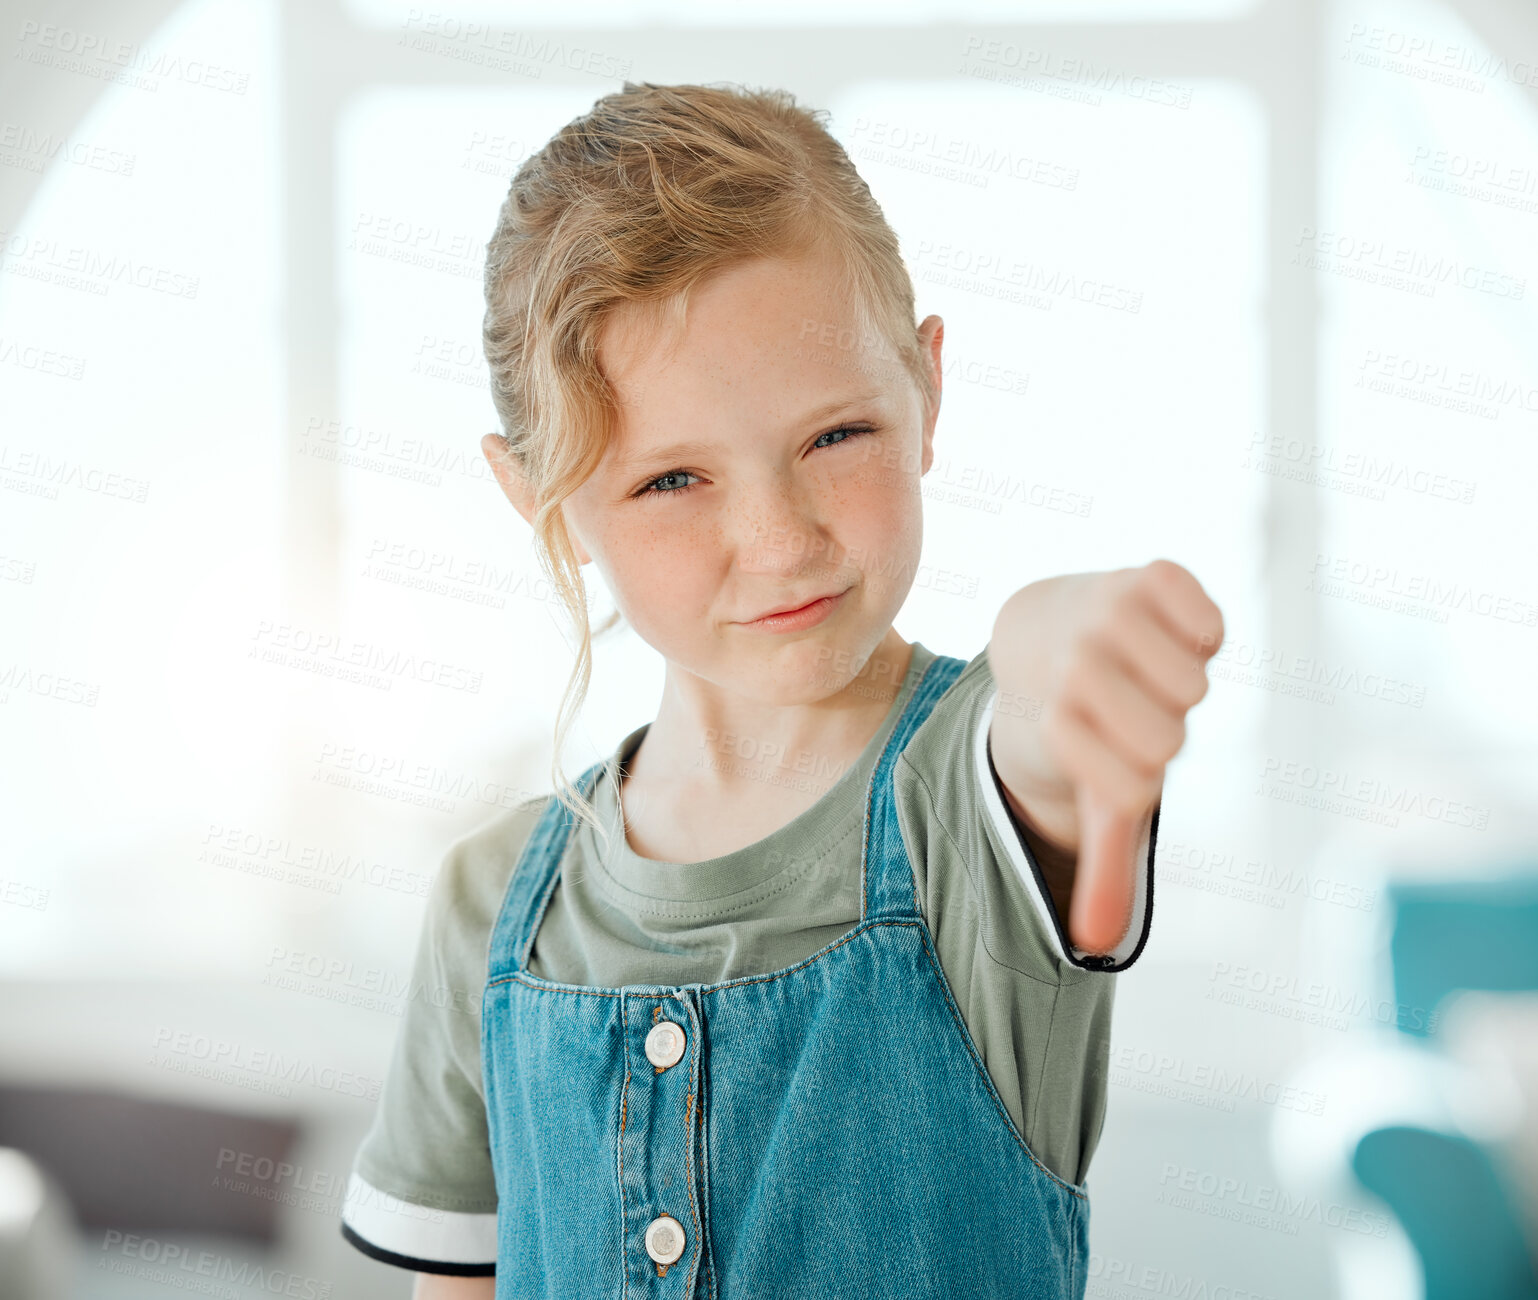 Buy stock photo Shot of an adorable little girl standing alone at home and showing a thumbs down